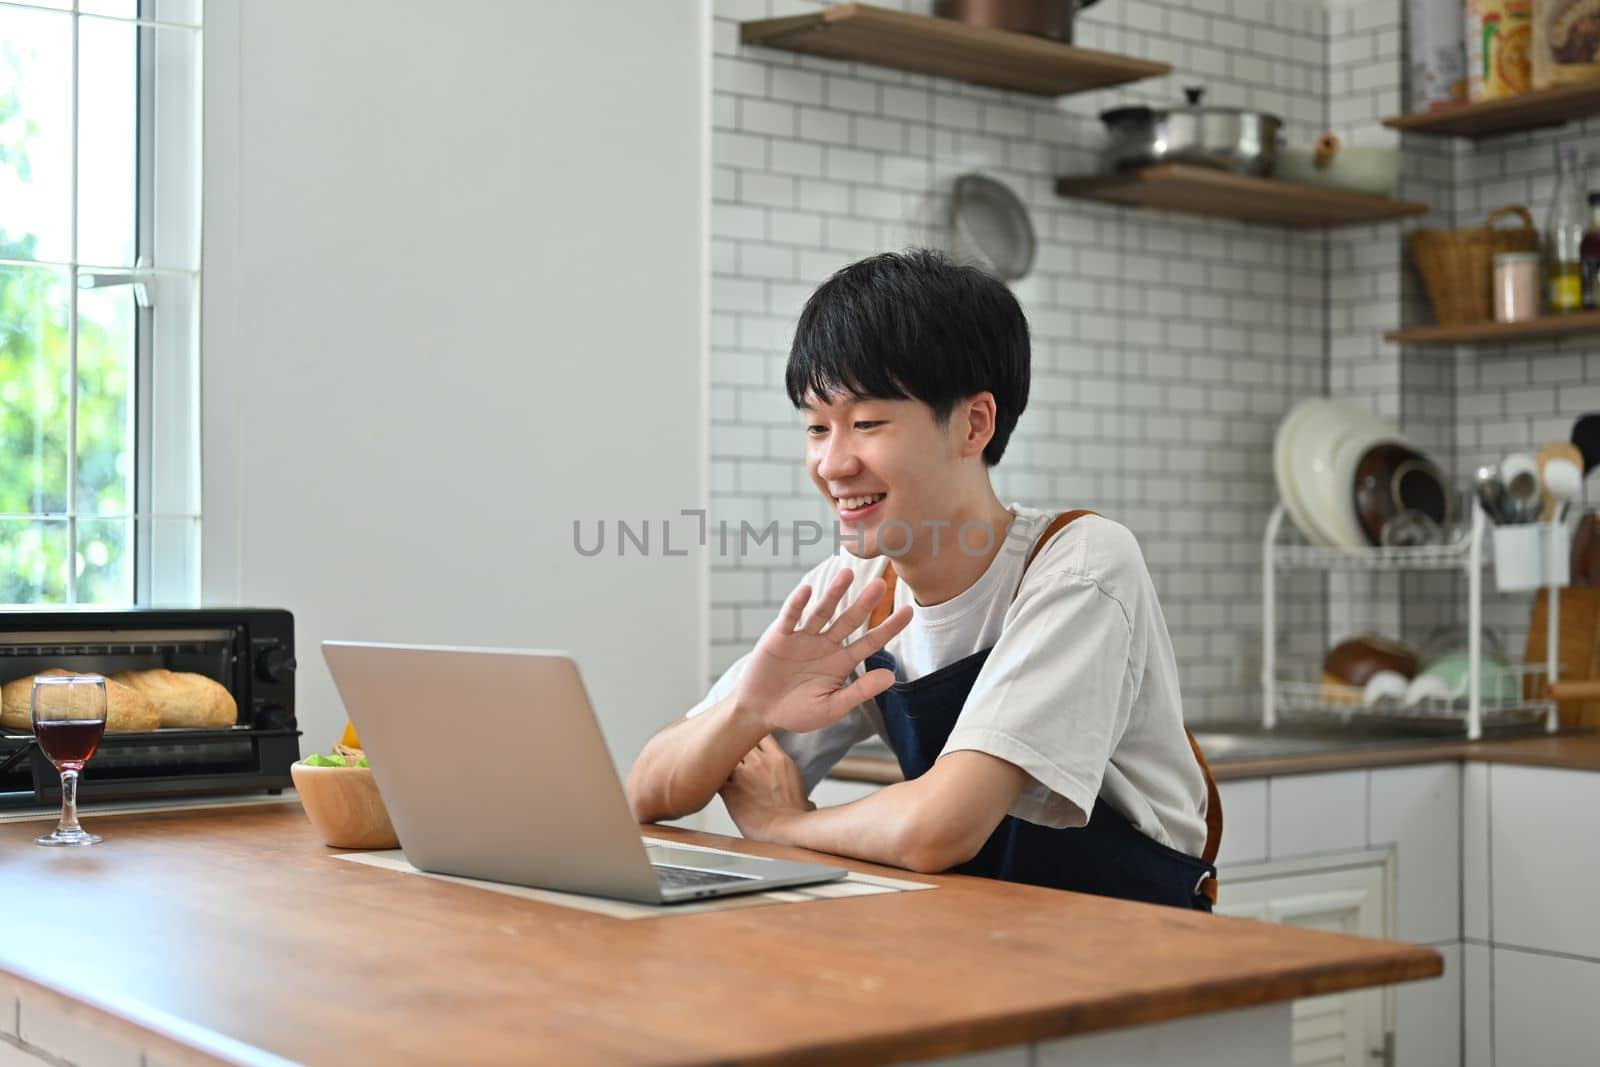 Cheerful young man freelancer checking email in morning, working online on laptop while sitting at wooden table in kitchen.